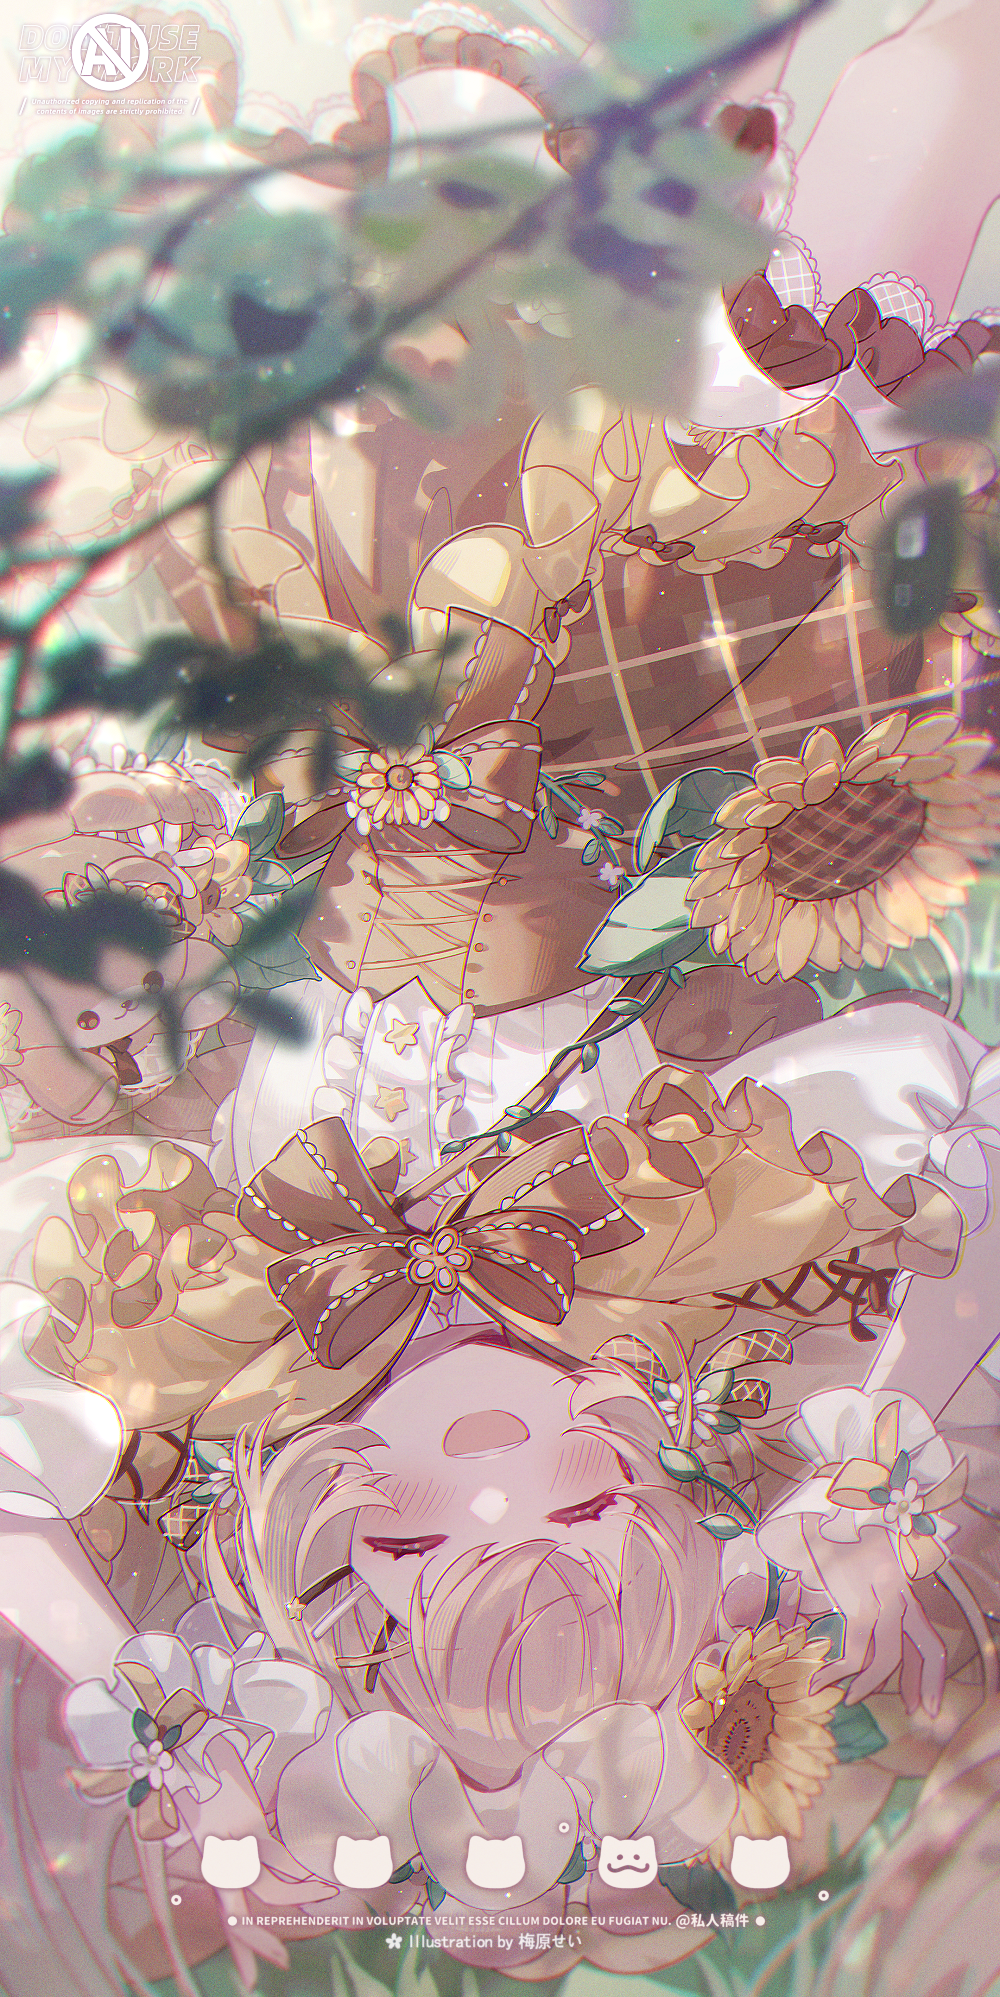 Anime 1000x1997 anime anime girls Pixiv portrait display open mouth closed eyes blushing upside down watermarked sunflowers wrist cuffs dress doll frills frill dress leaves hair ornament plants